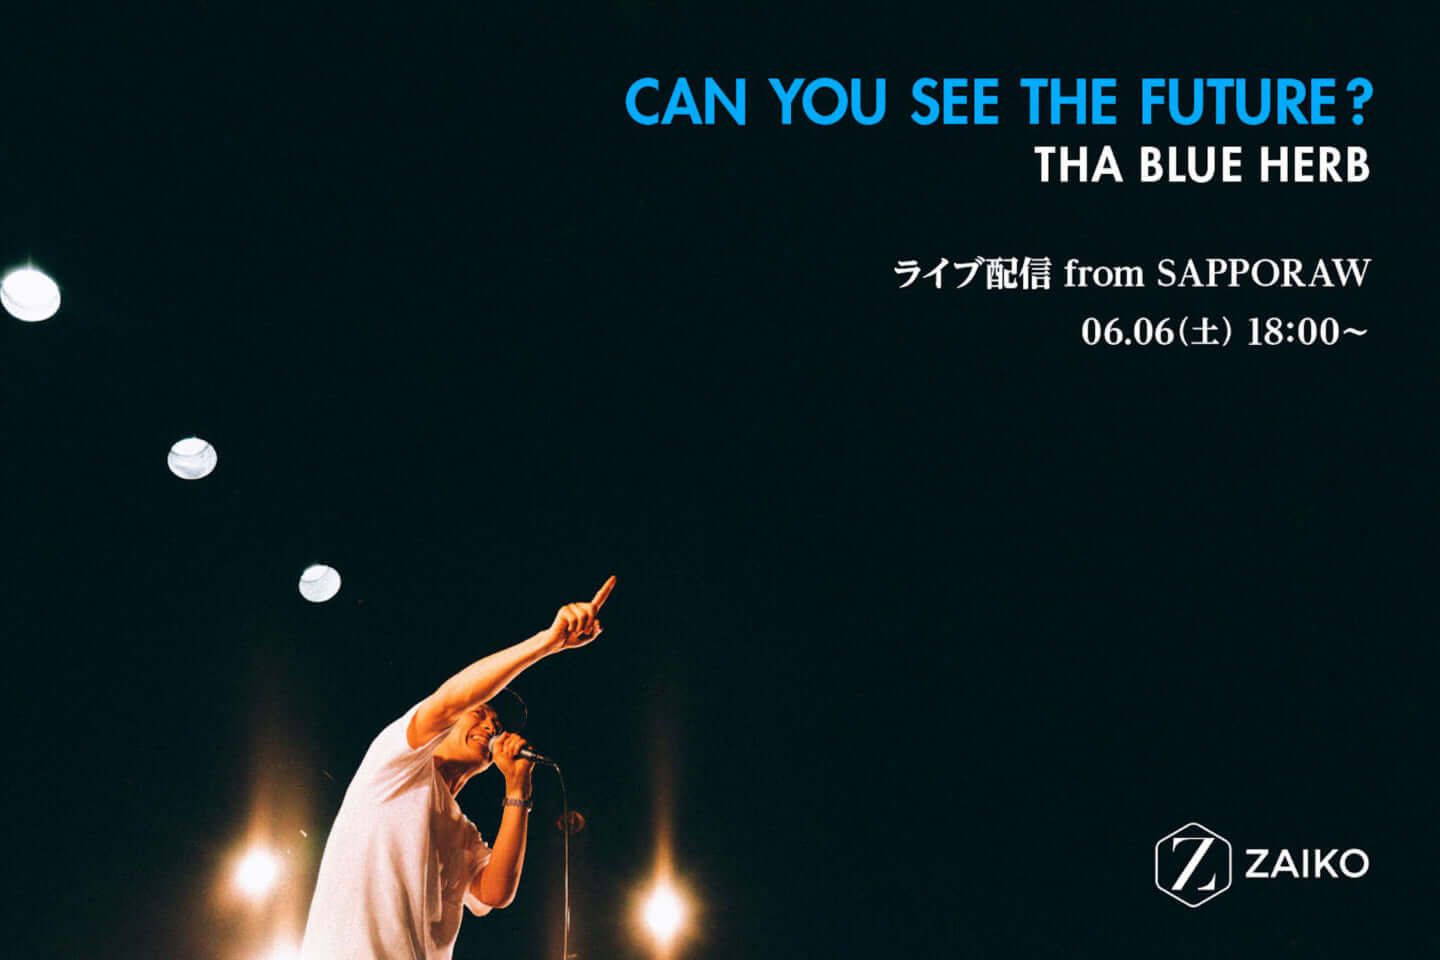 [Live Streaming] CAN YOU SEE THE FUTURE? THA BLUE HERB